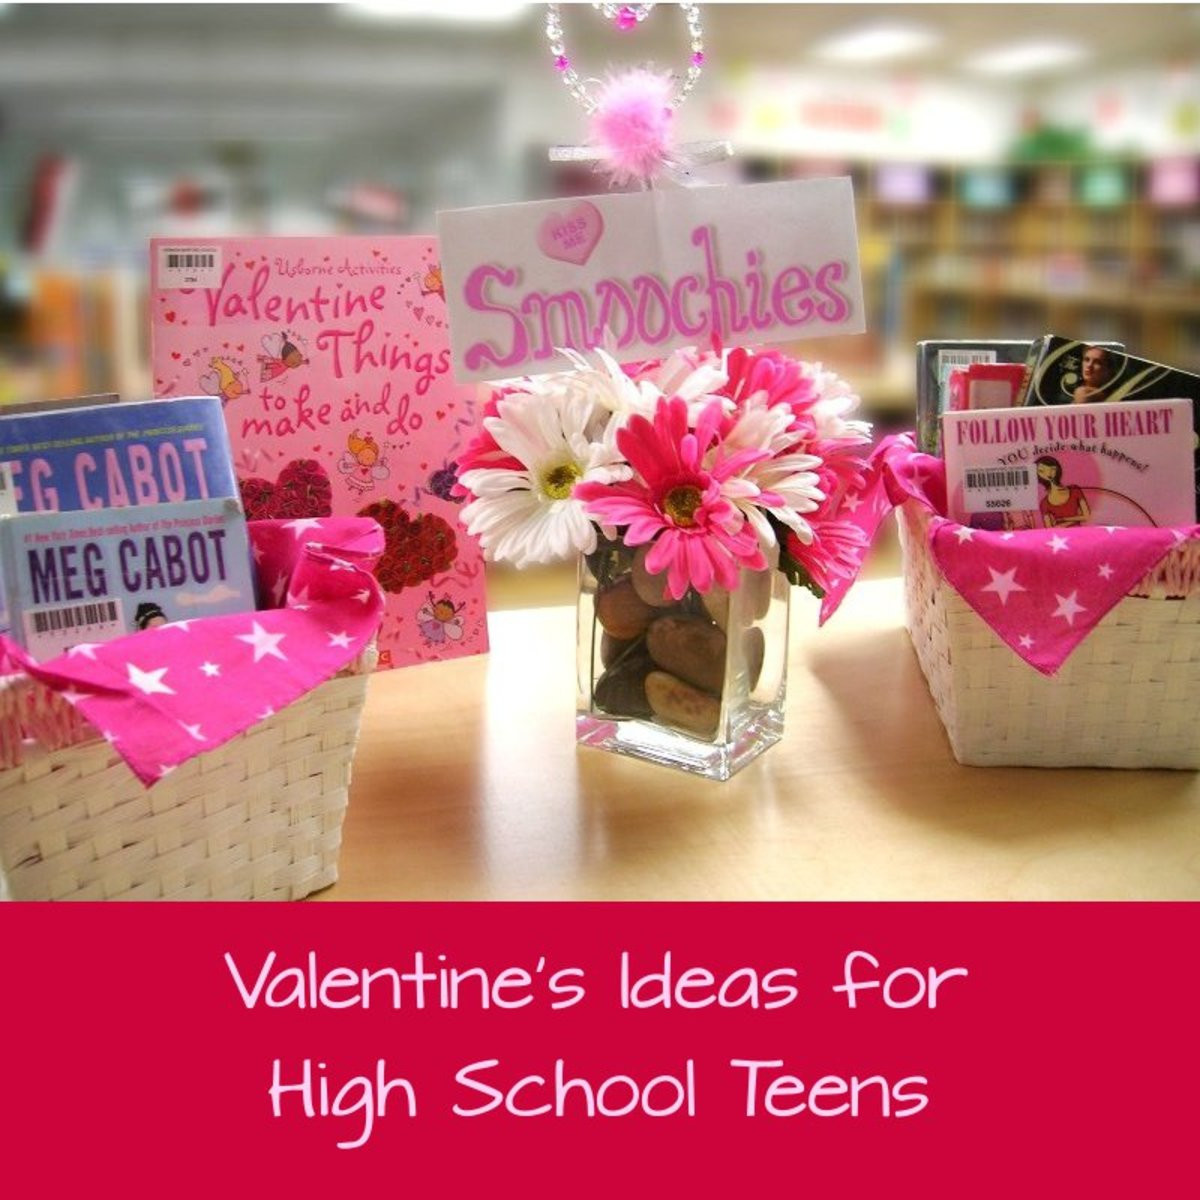 Valentines Gift Ideas For College Students
 Valentine s Day Gift Ideas for High School Teens